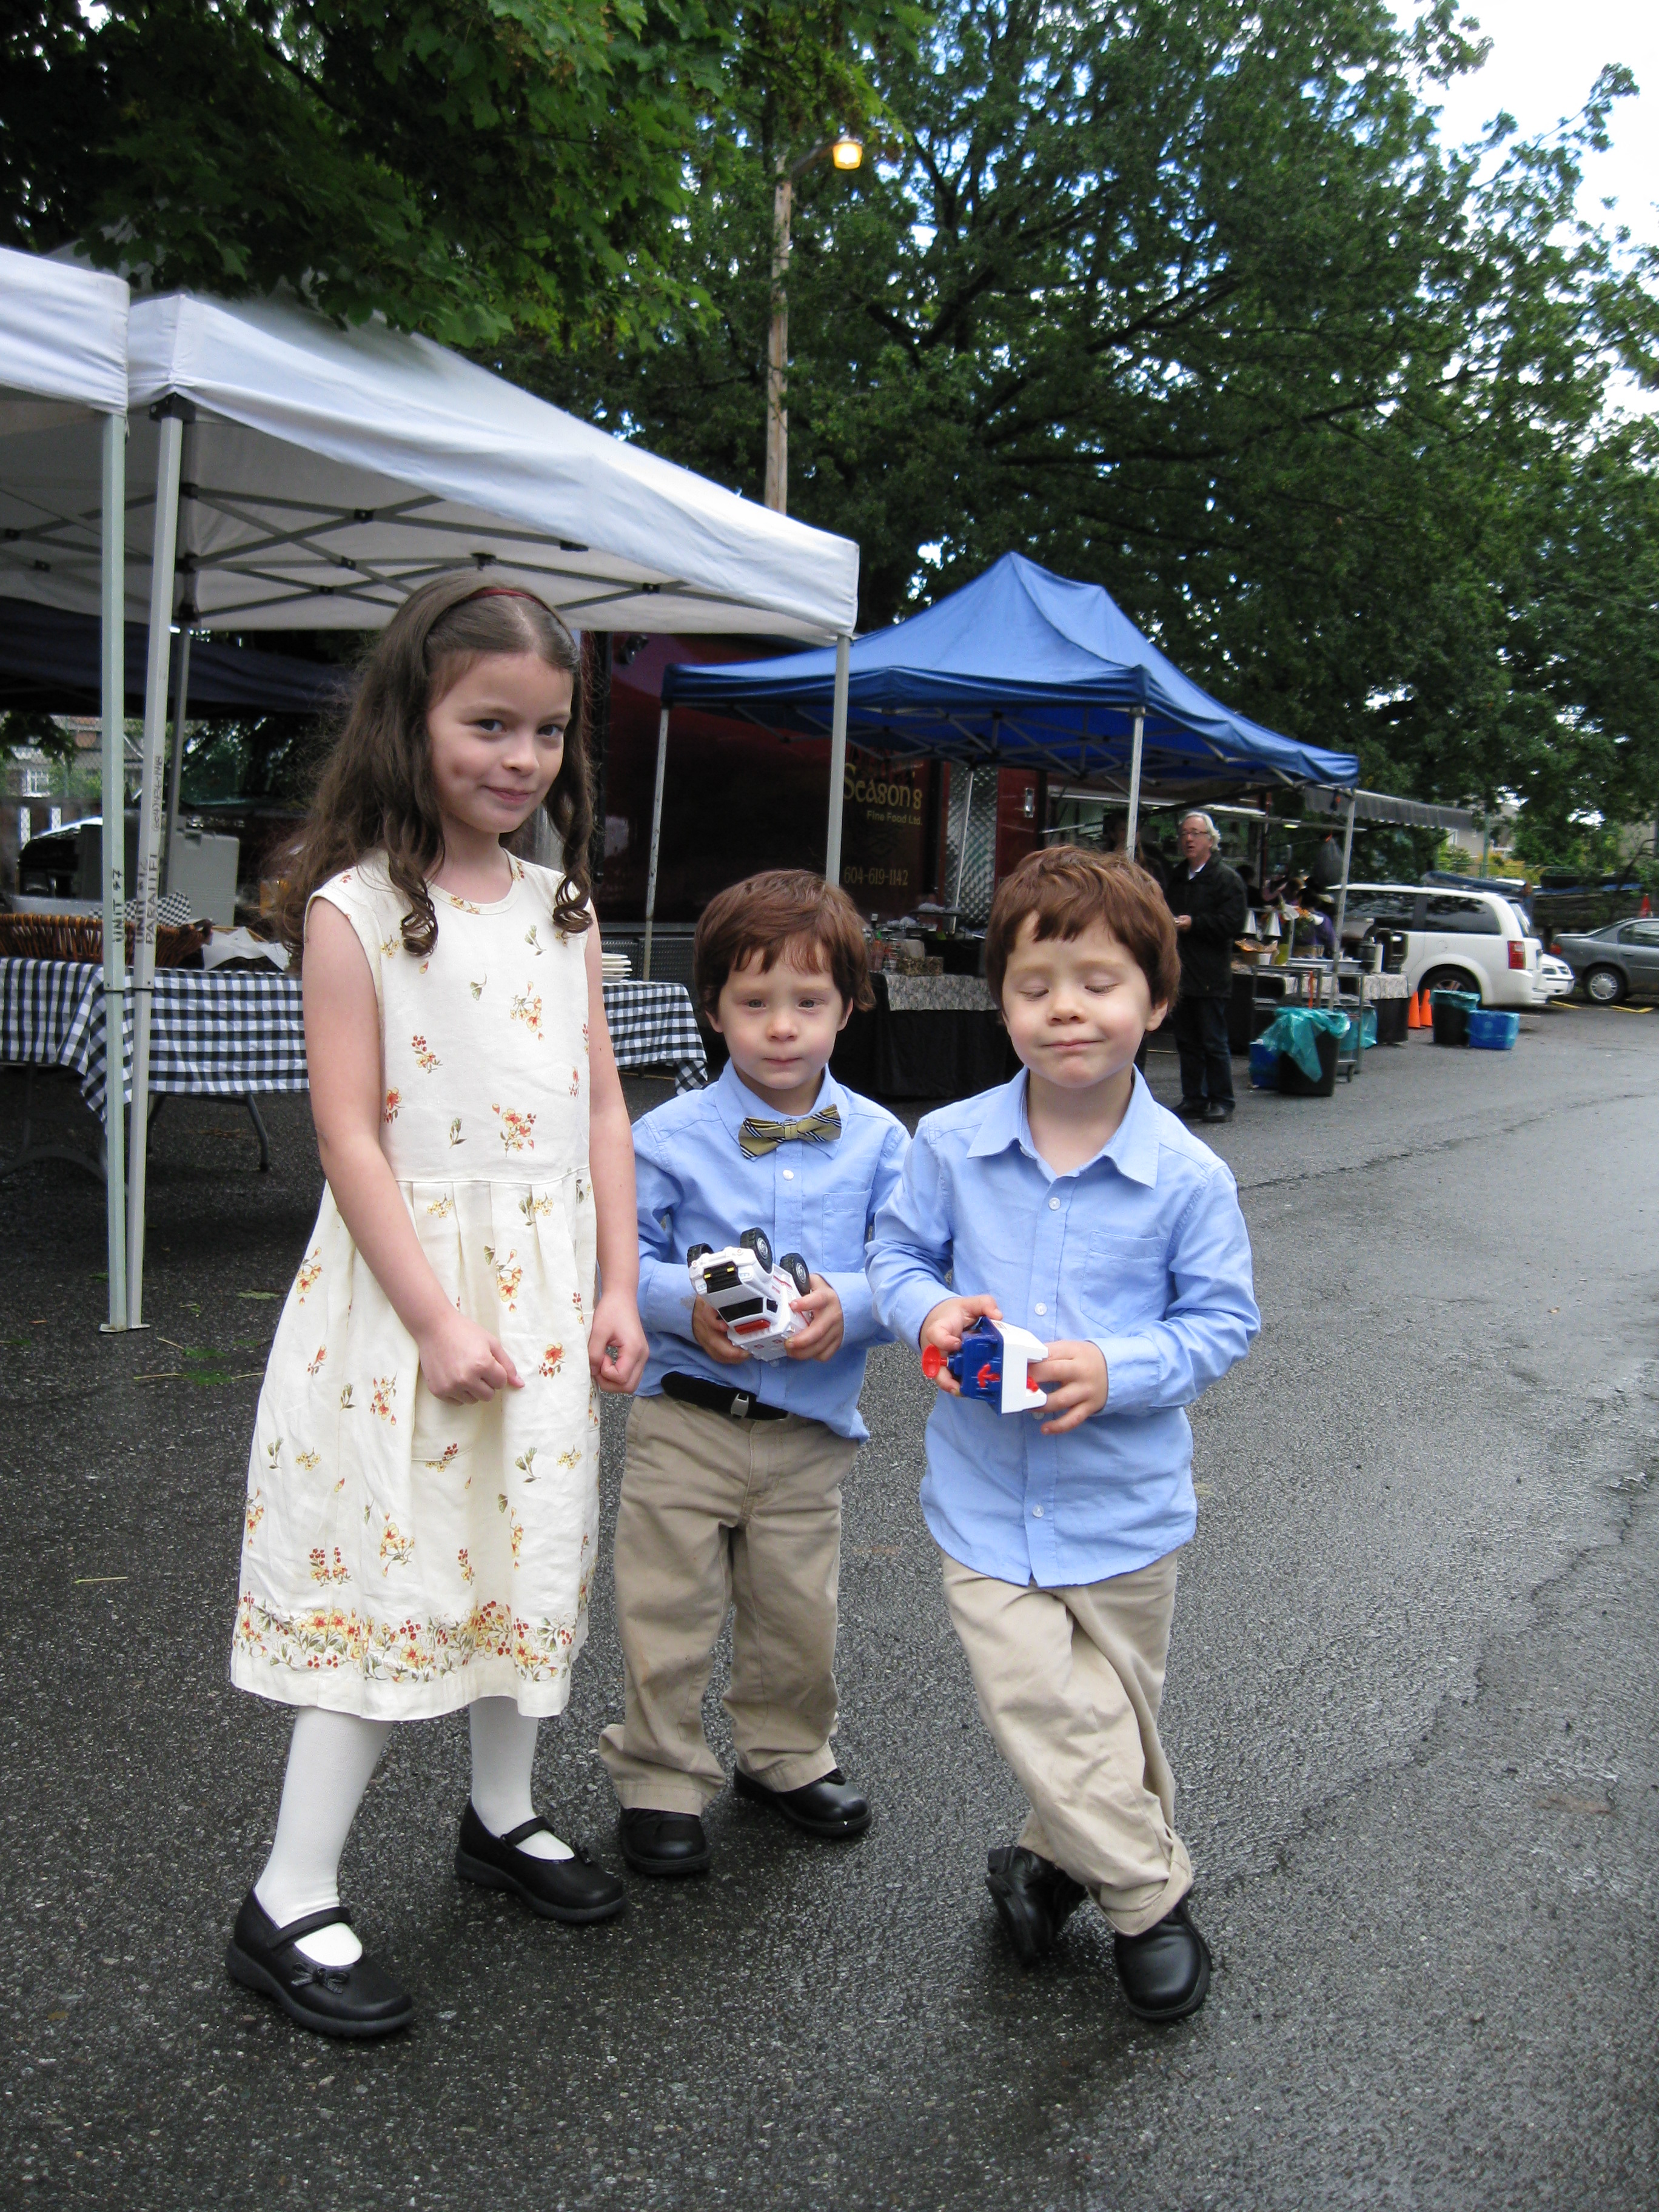 Dalila Bela & the Twins (Owen & Connor Fielding) on the set of 